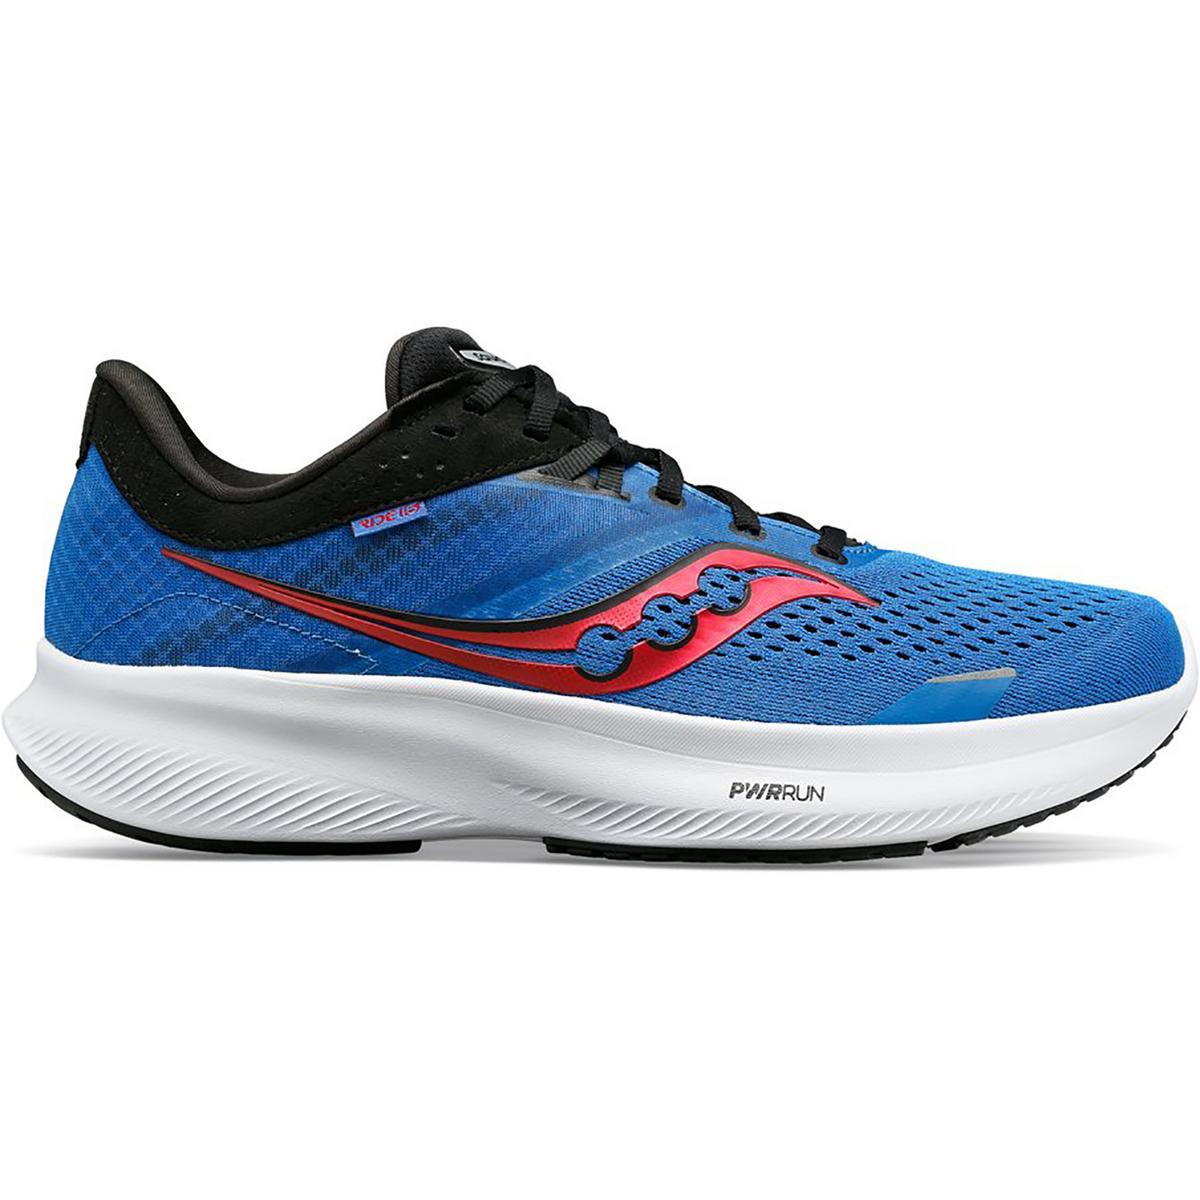 Saucony Mens Ride 16 Fitness Workout Running Training Shoes Sneakers Bhfo 2879 Hydro/Black